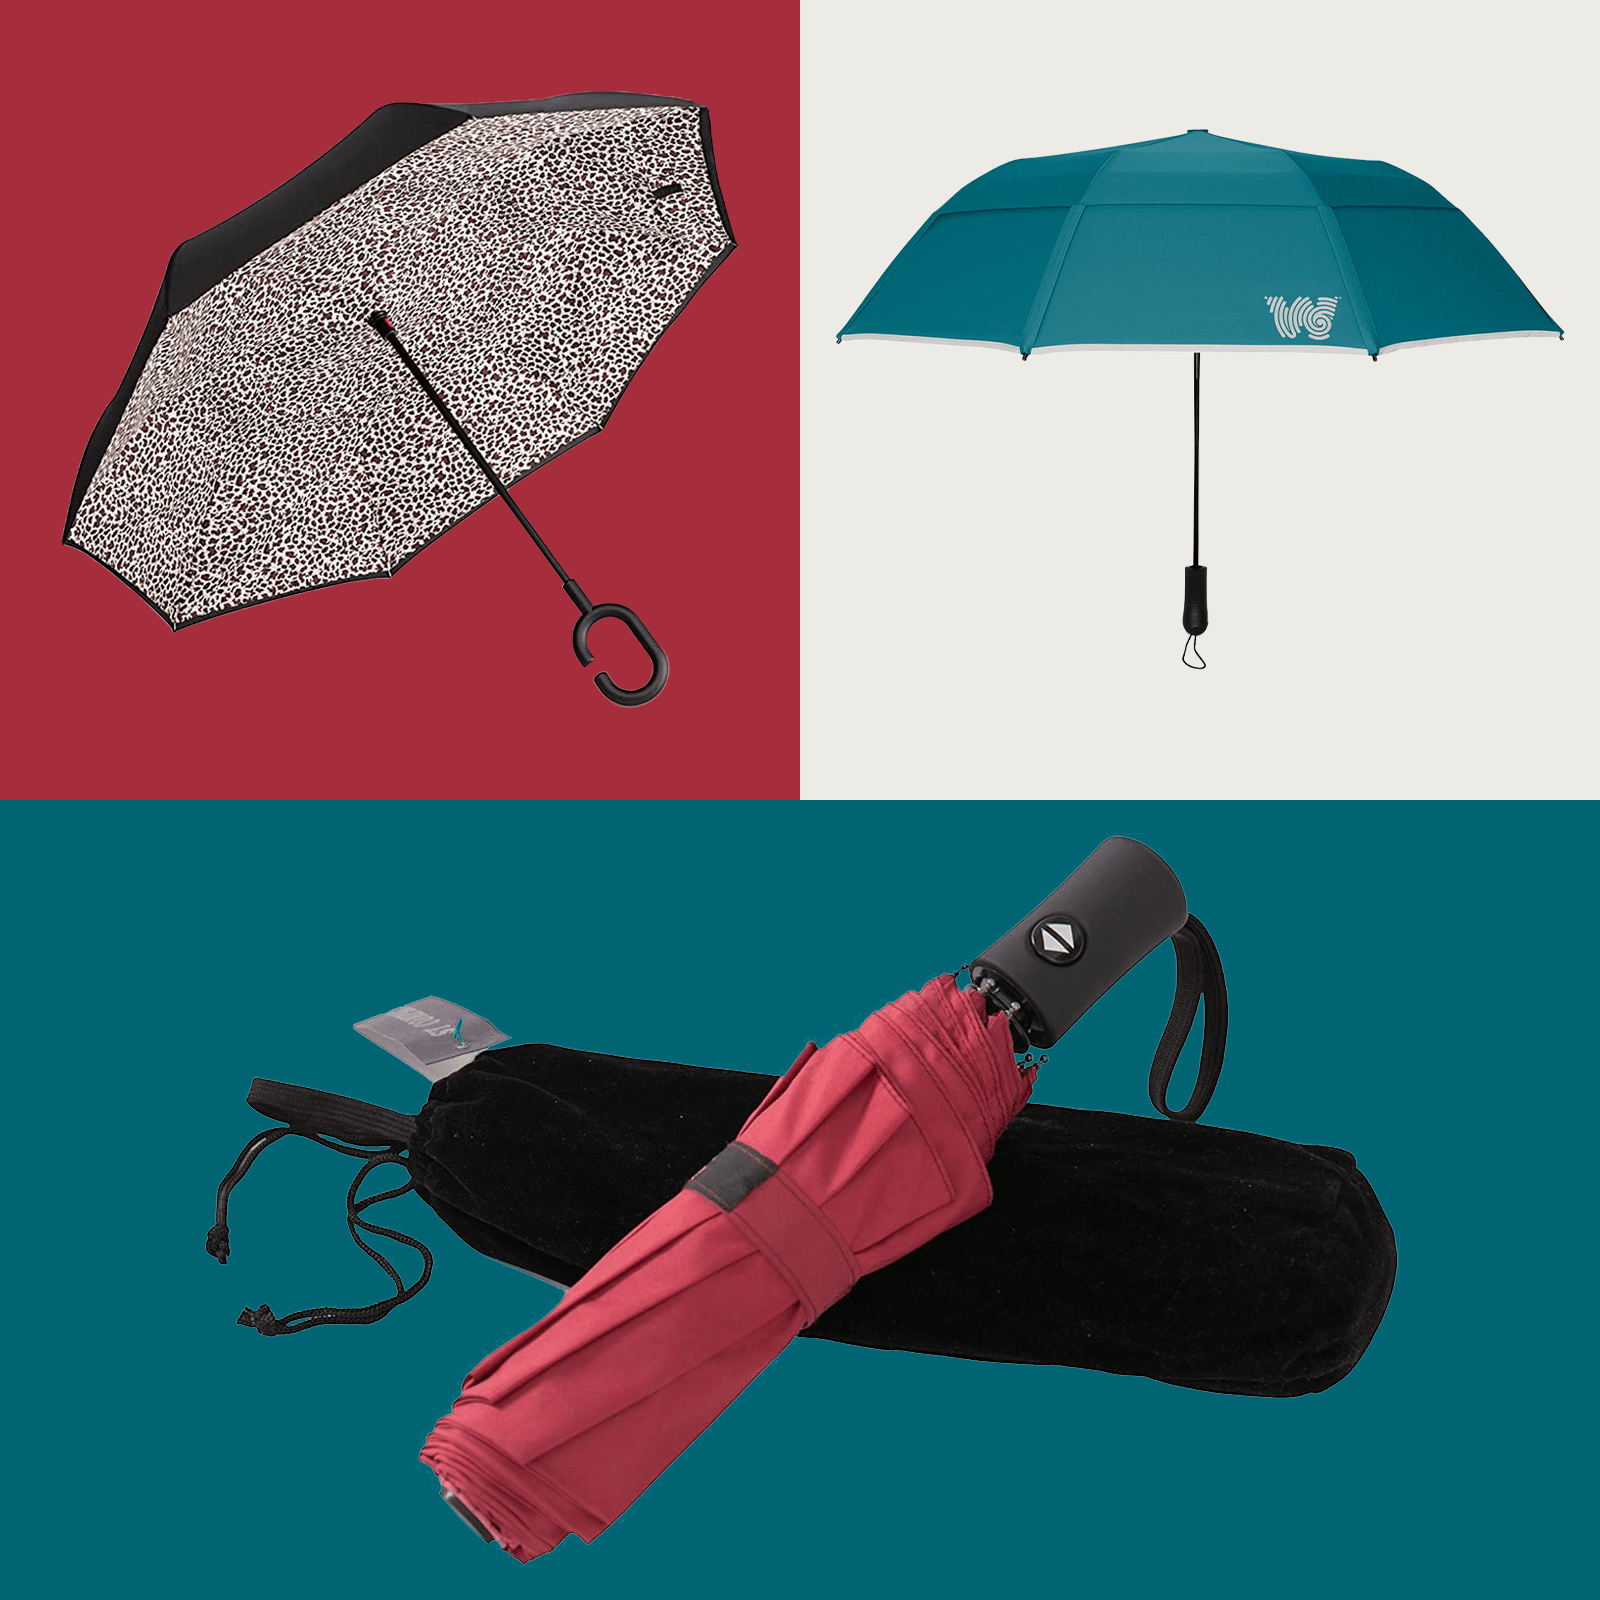 An umbrella to keep your backpack dry is just the thing we need